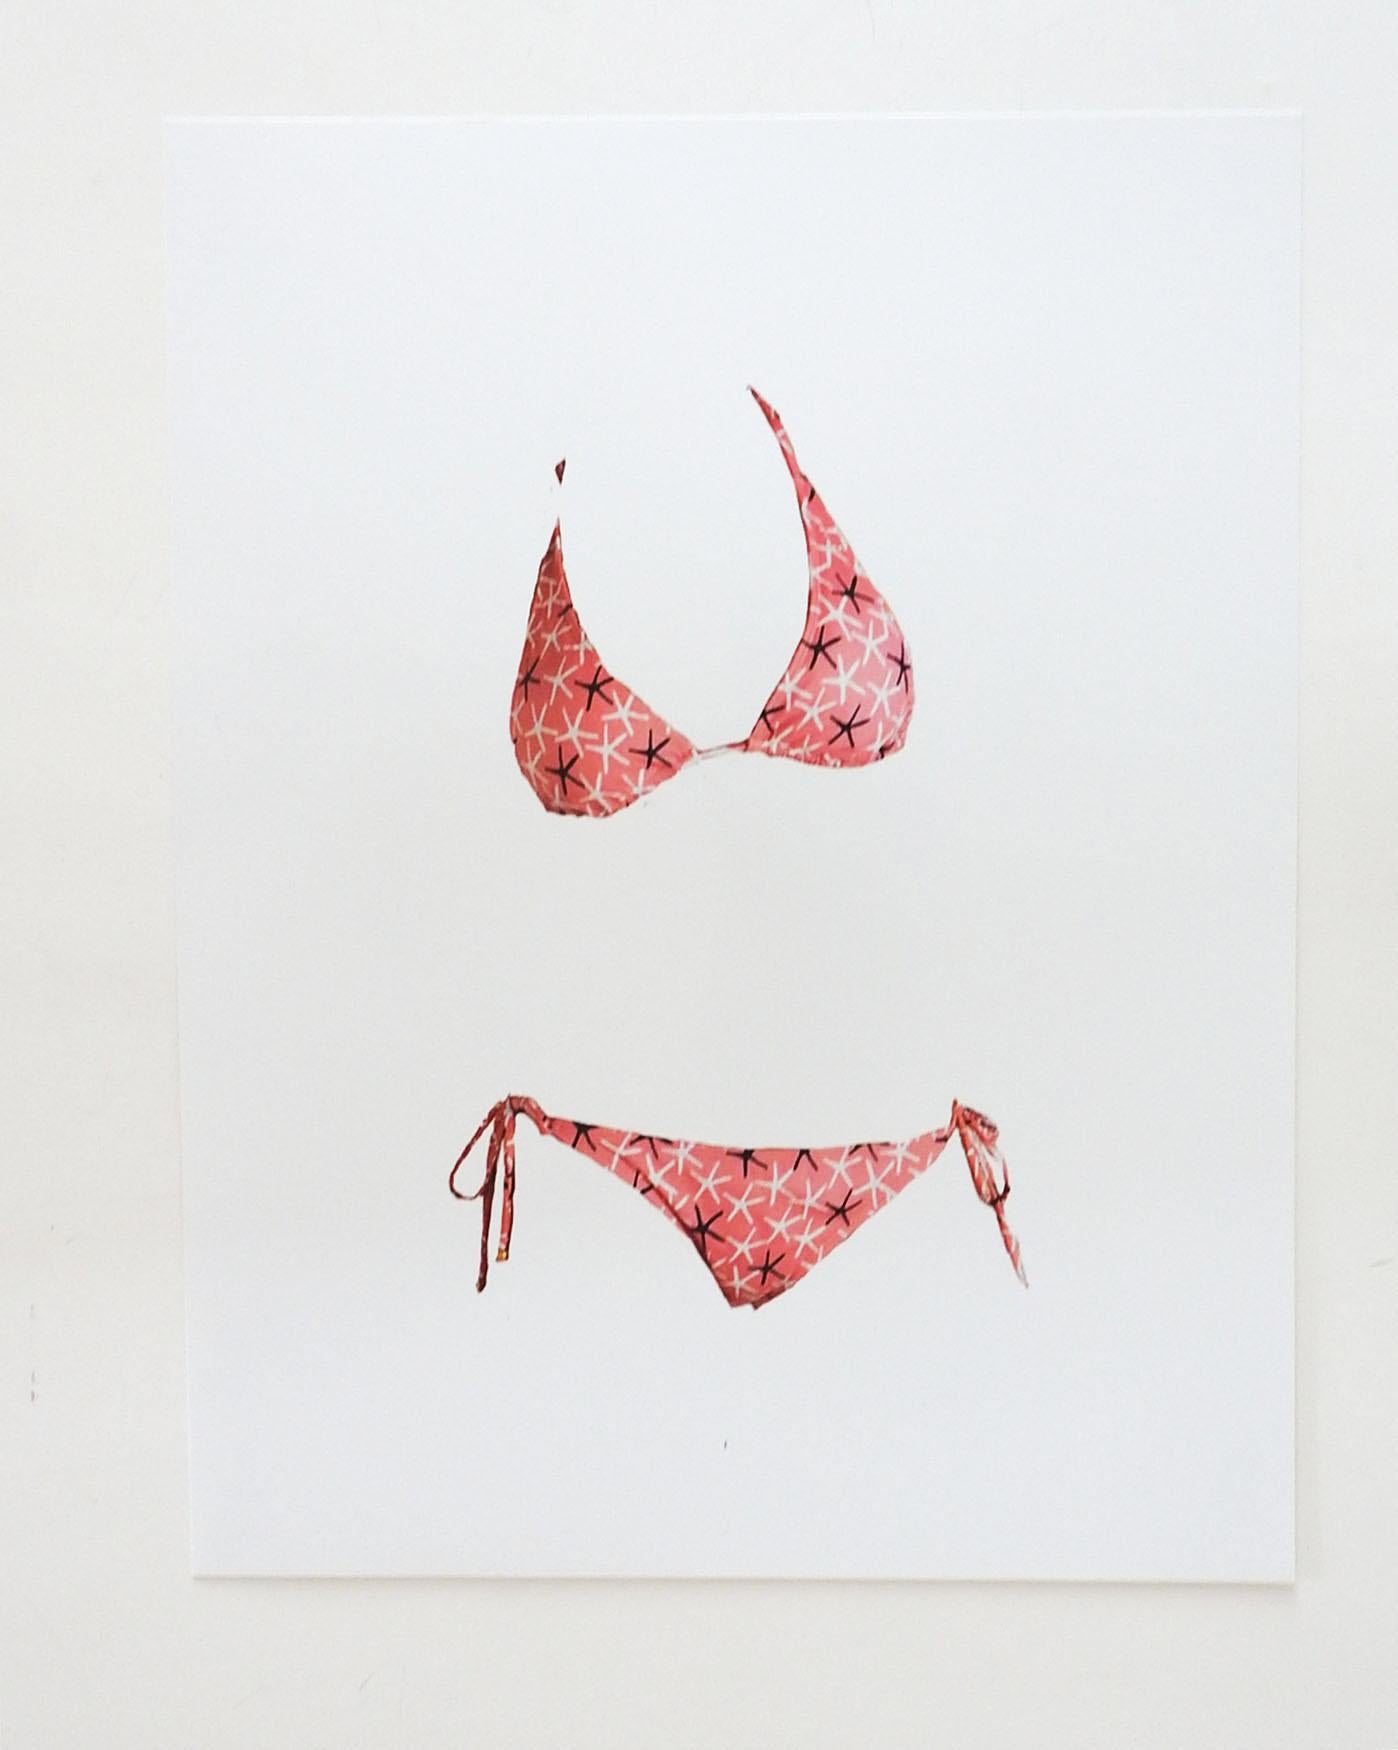 Contemporary 2021 Pop Art giclee print on satin photographic paper paper by David Grinnell (21st century) Texas. Unsigned, graphic pink print two piece bathing suit, from the artists estate. Unframed, very good condition.